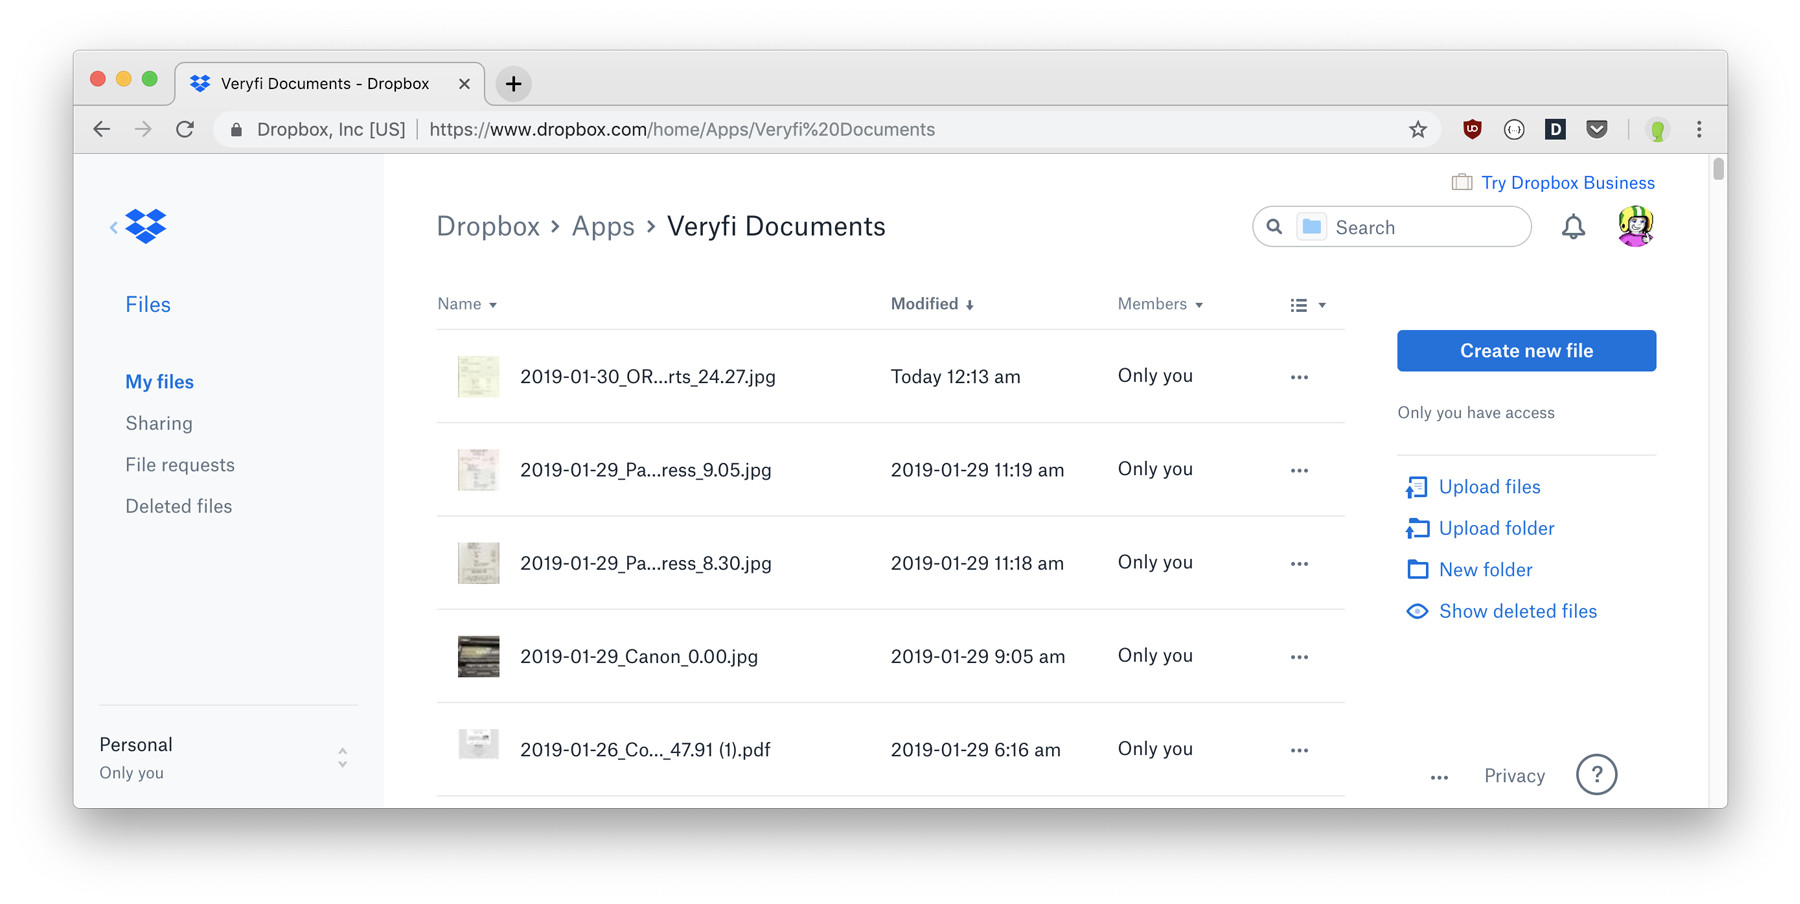 Dropbox Veryfi Slurp Integration showing Veryfi Documents folder where Receipts, Bills & Invoices are backed up to